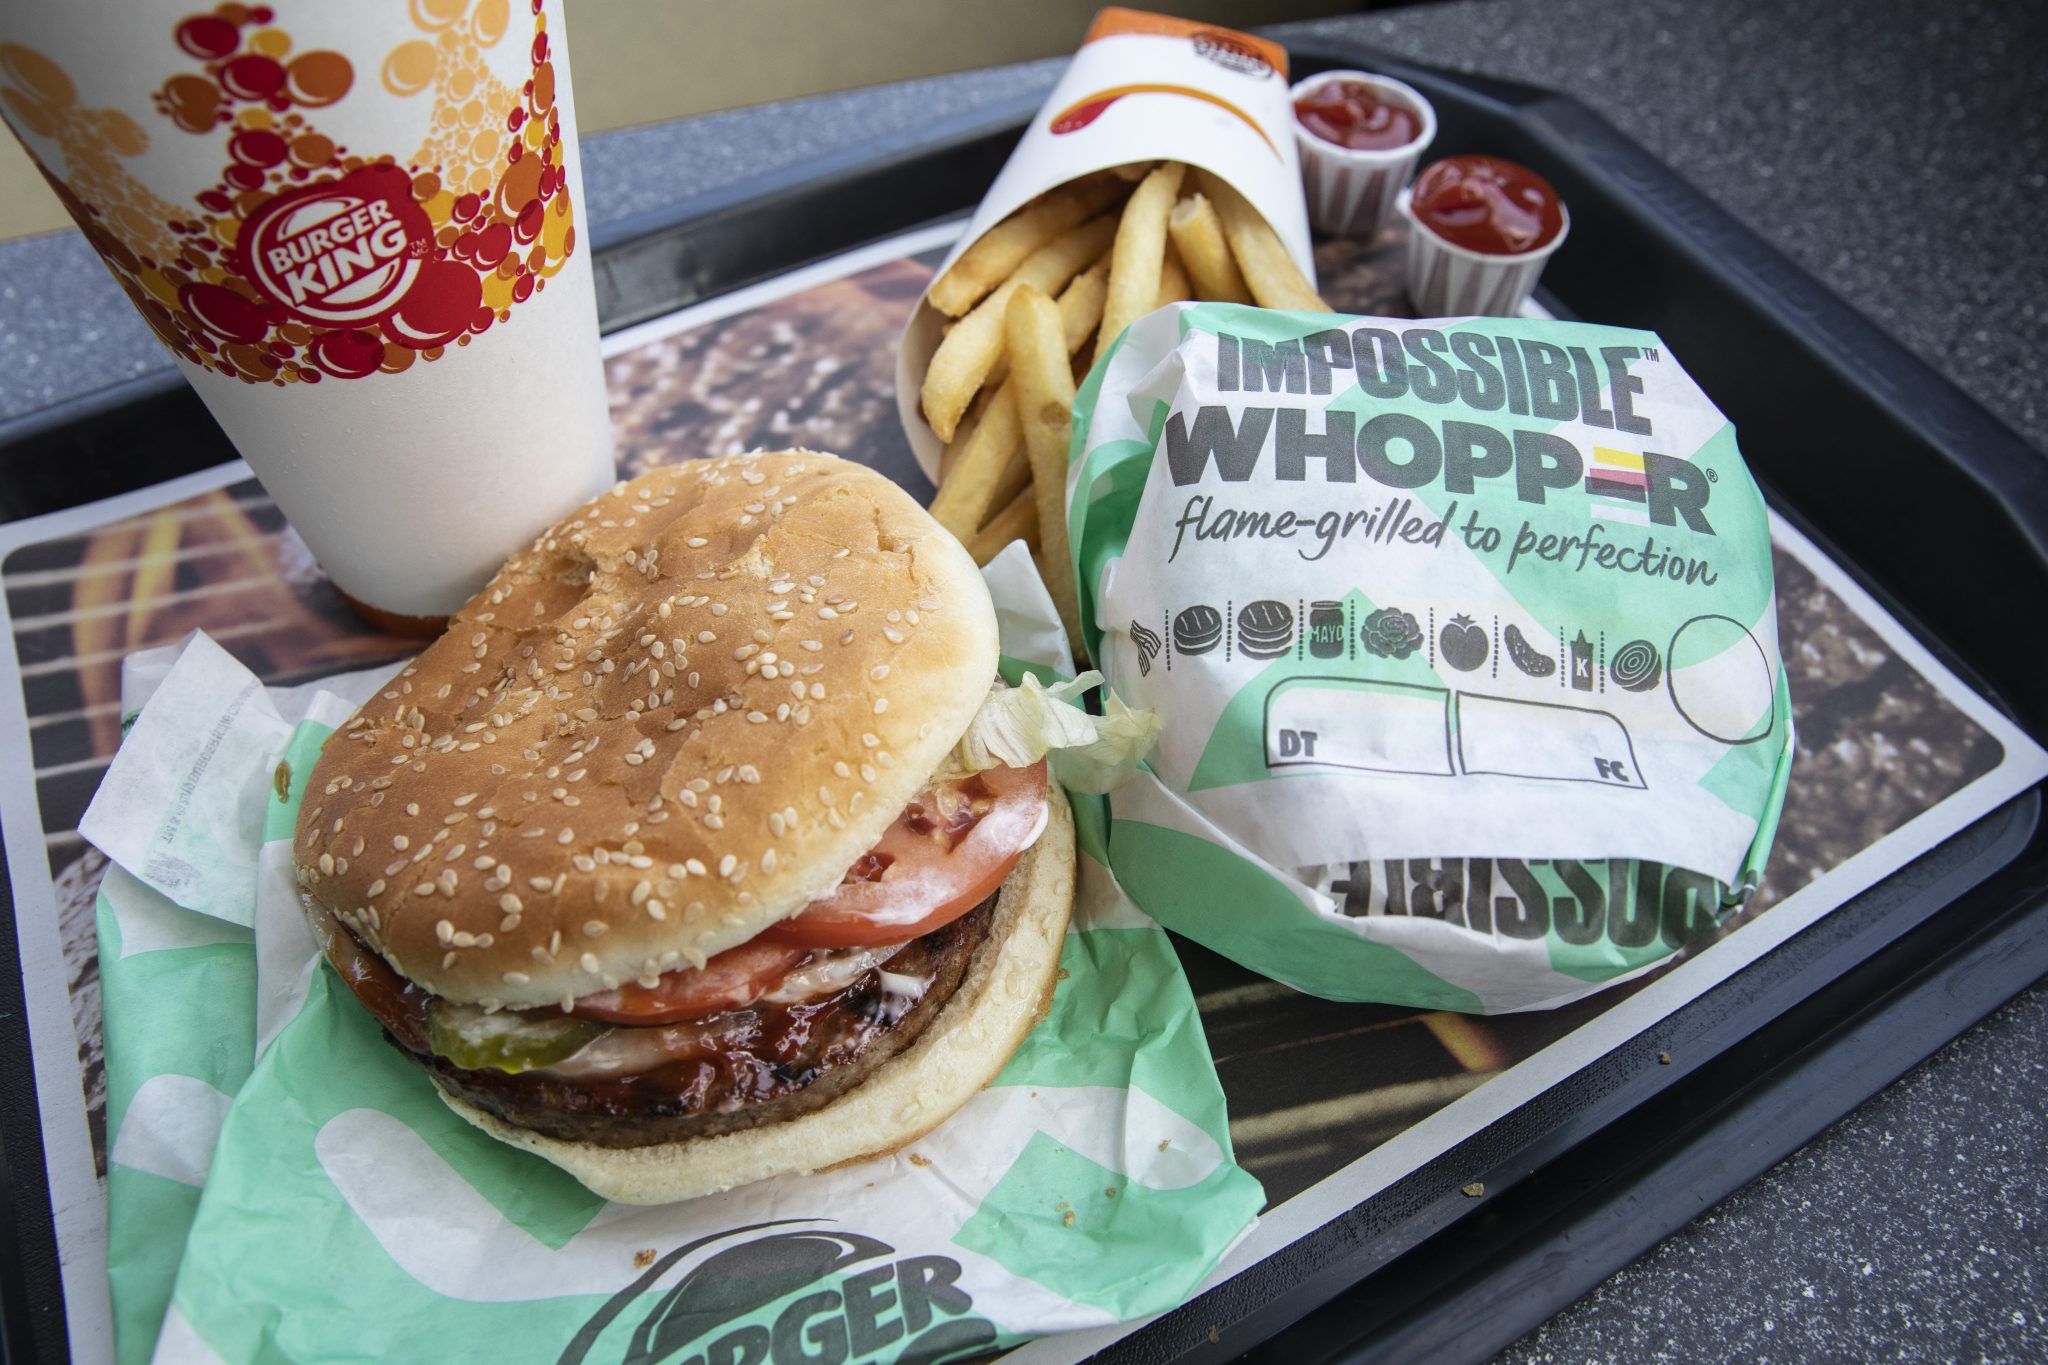 NEW YORK, NY - AUGUST 8: In this photo illustration, the new Impossible Whopper sits on a table at a Burger King restaurant on August 8, 2019 in the Brooklyn borough of New York City. On Thursday, Burger King is launching its soy-based Impossible Whopper at locations nationwide. The meatless patties are produced by California tech startup Impossible Foods. A single Impossible Whopper sandwich costs $5.99. (Photo by Drew Angerer/Getty Images)